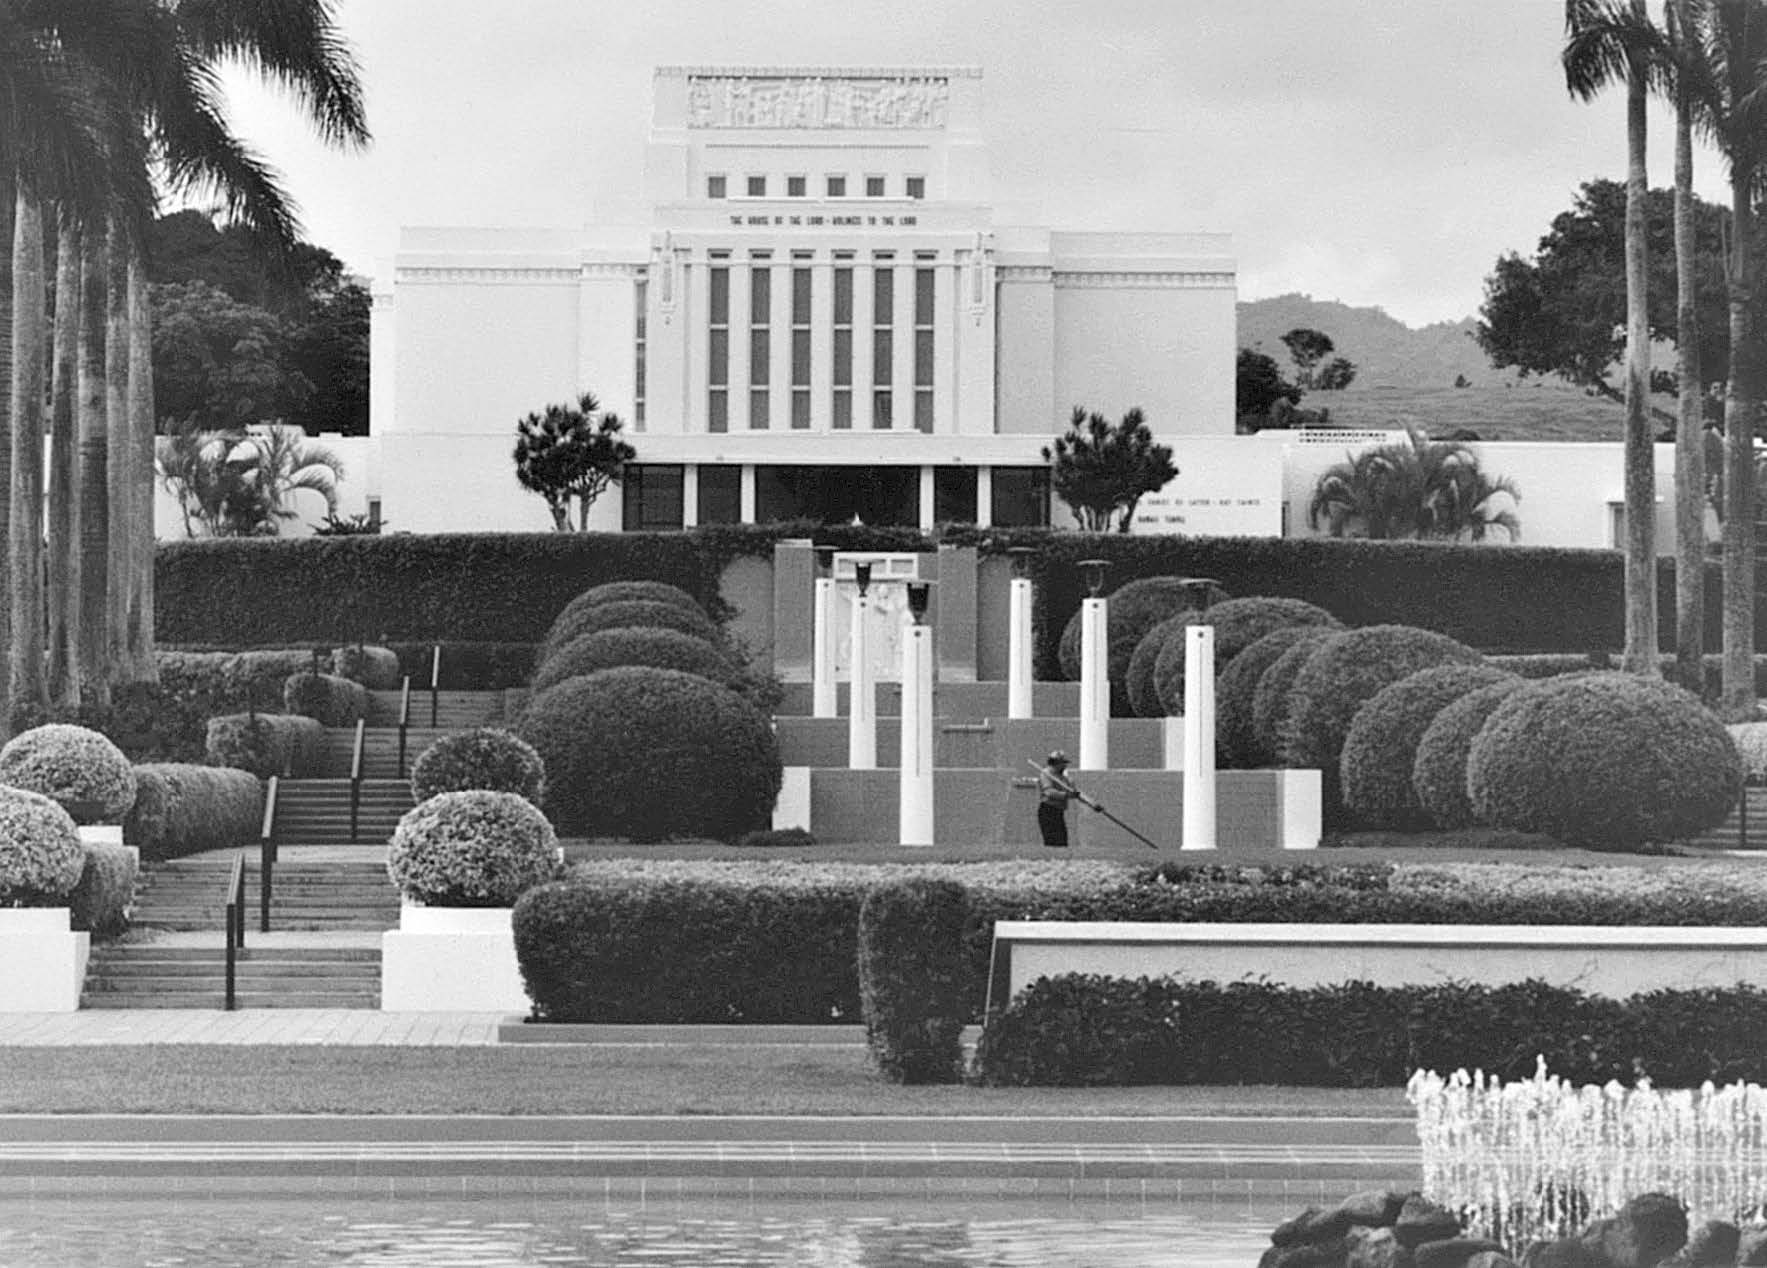 Remarkable aesthetic beauty of the temple grounds has been achieved over the years by those who, often without notice, maintain them. Courtesy of Church History Library.